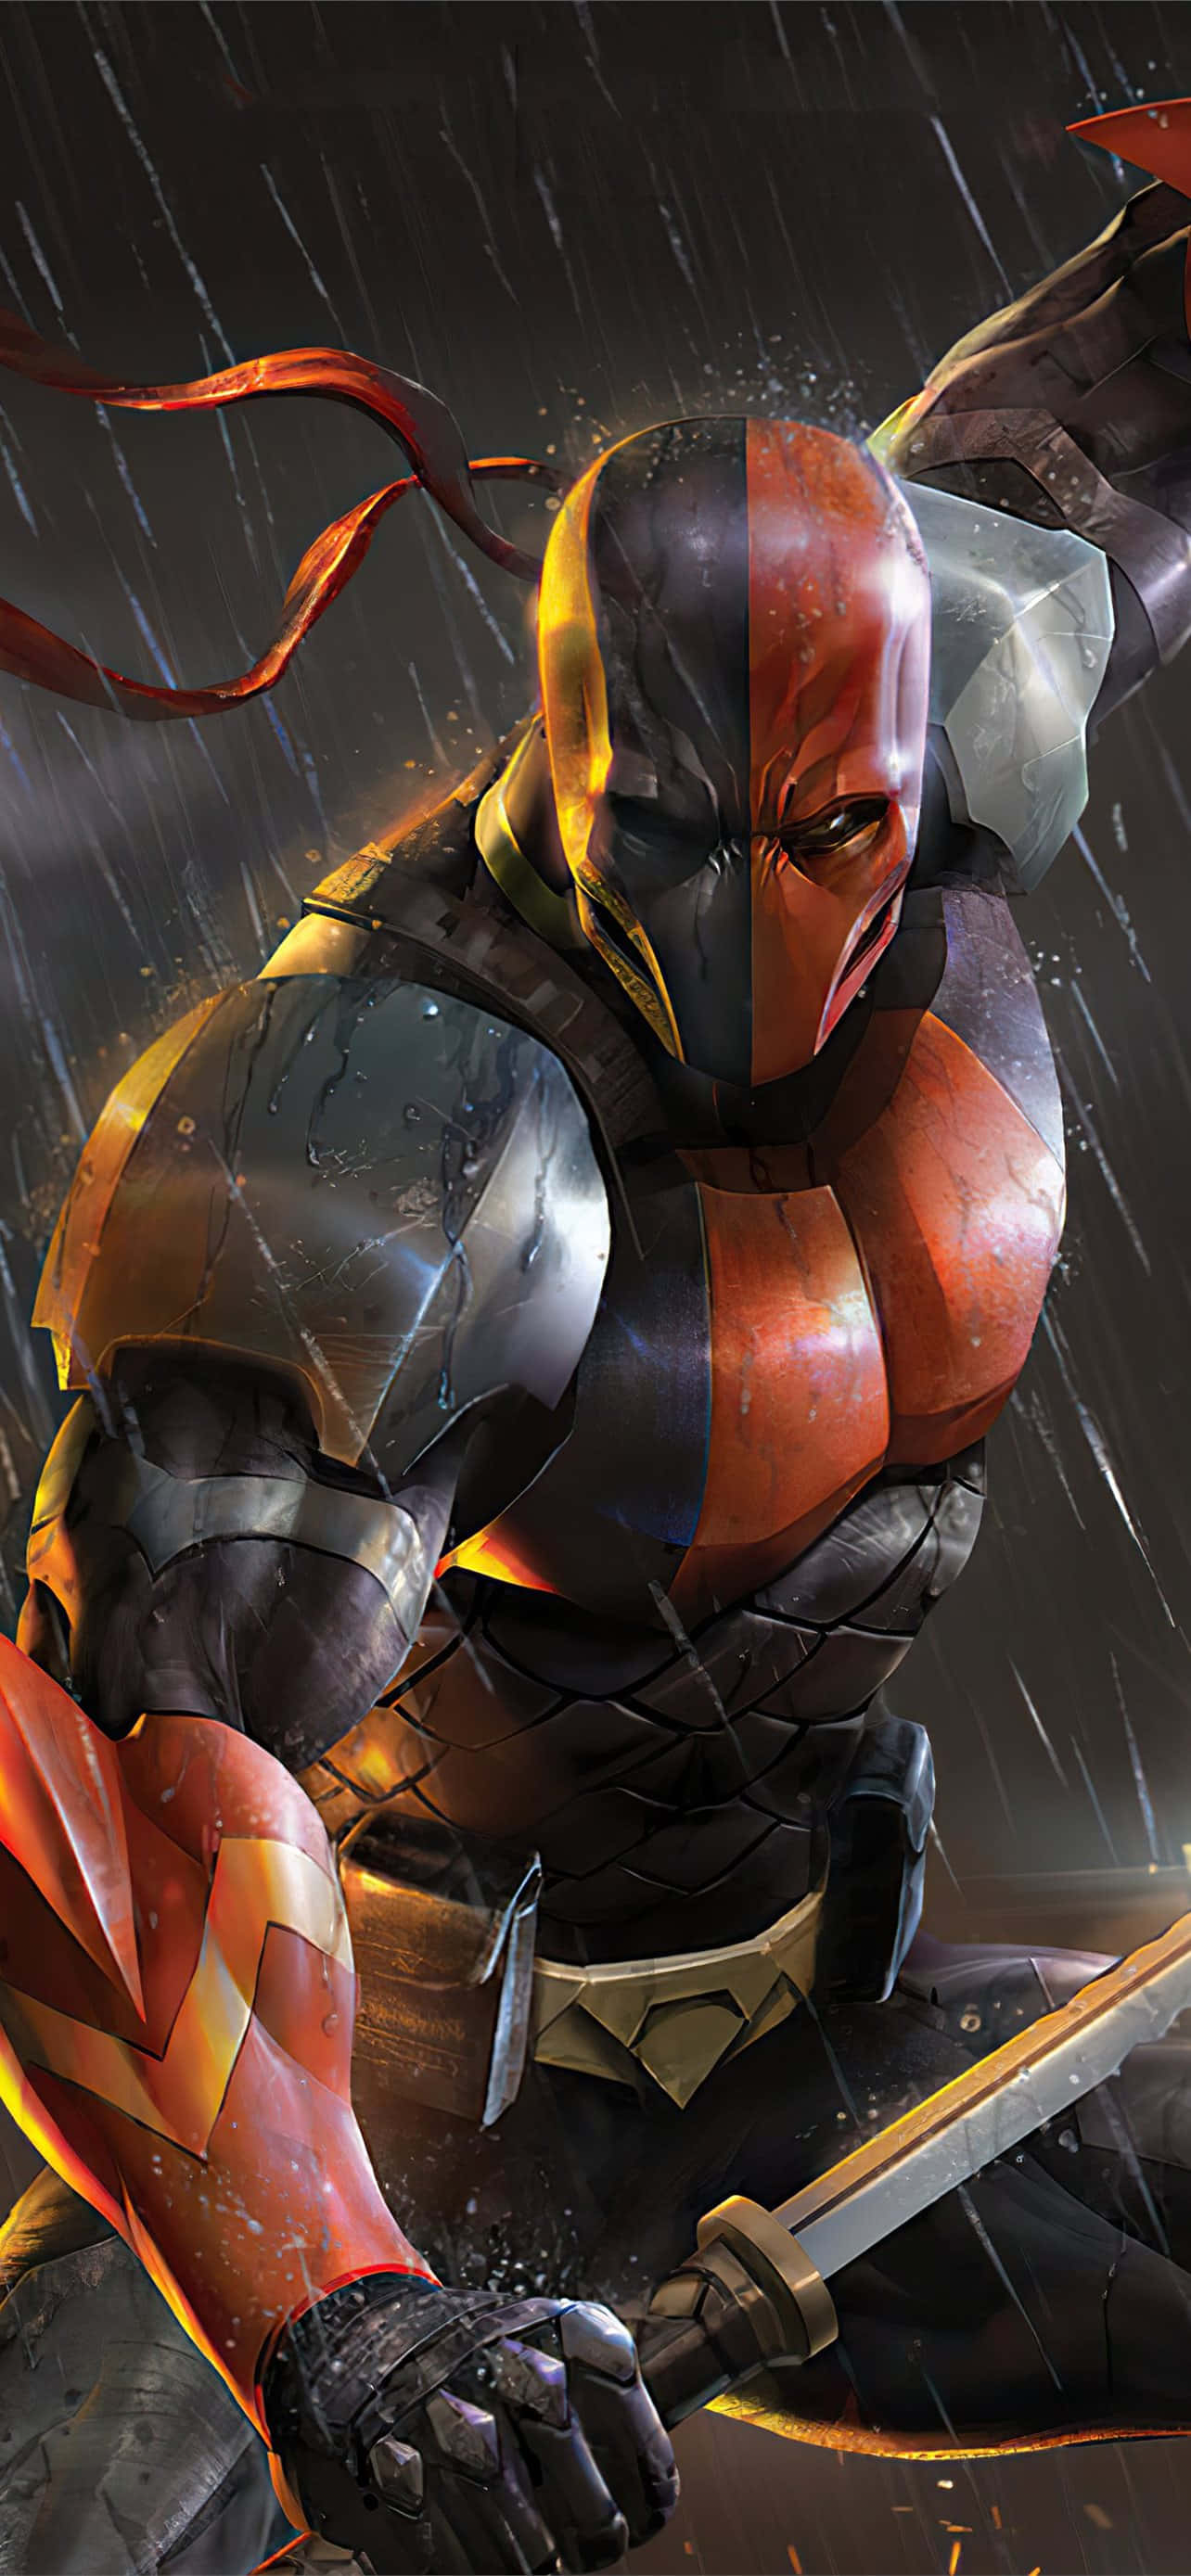 Deathstroke is a relentless assassin, ready to take down any obstacles in his way